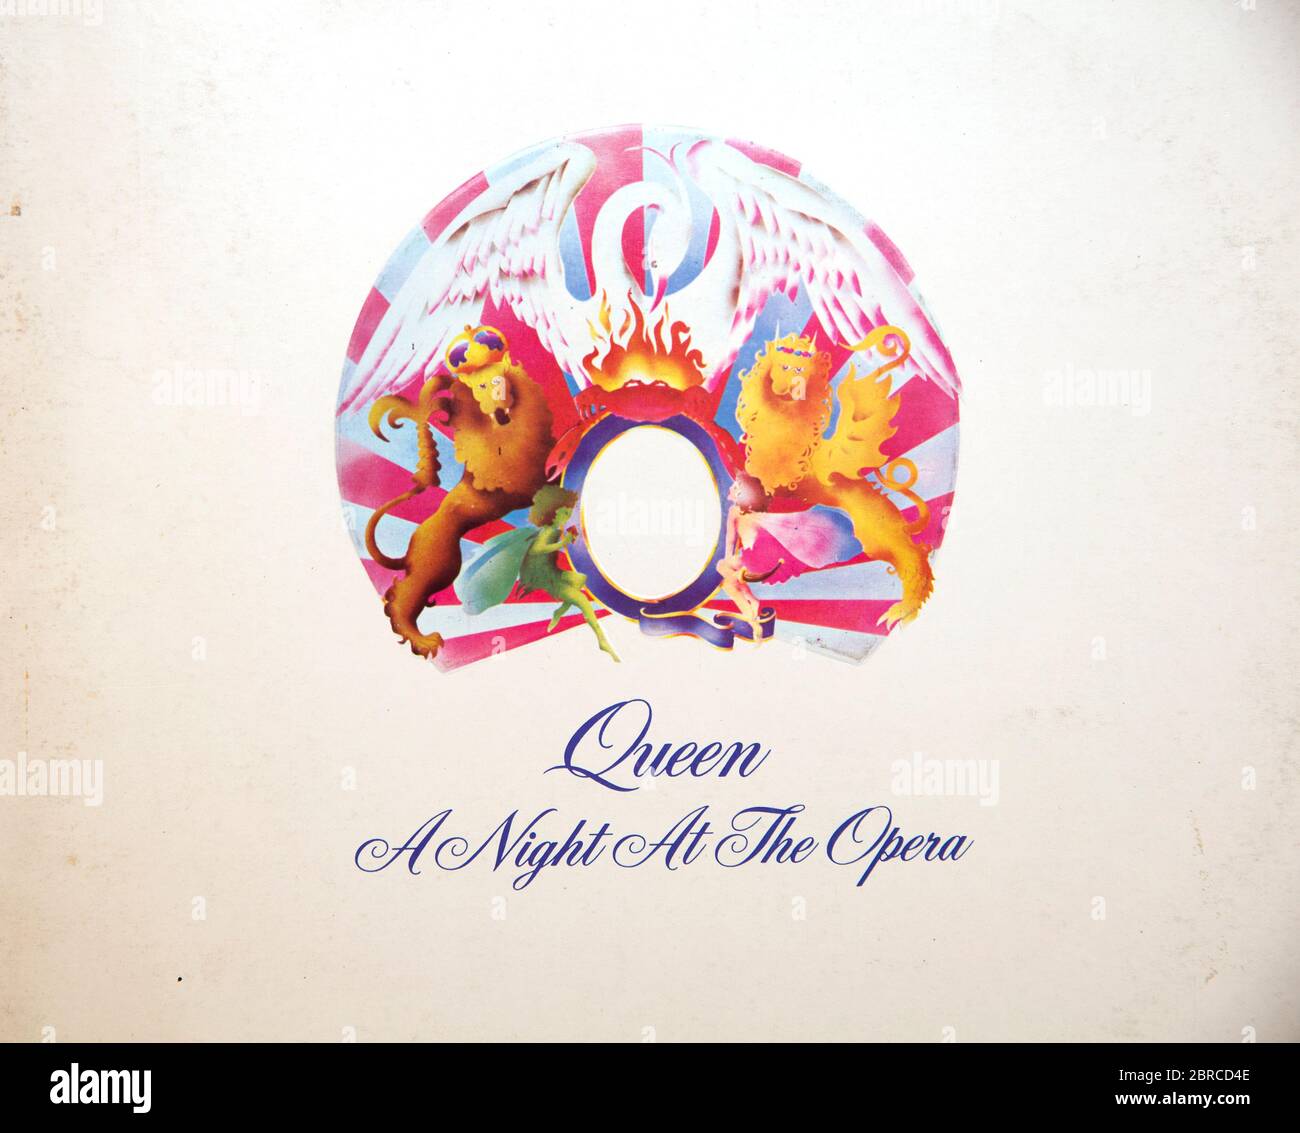 Cover of vinyl album A Night at the Opera by Queen Stock Photo - Alamy